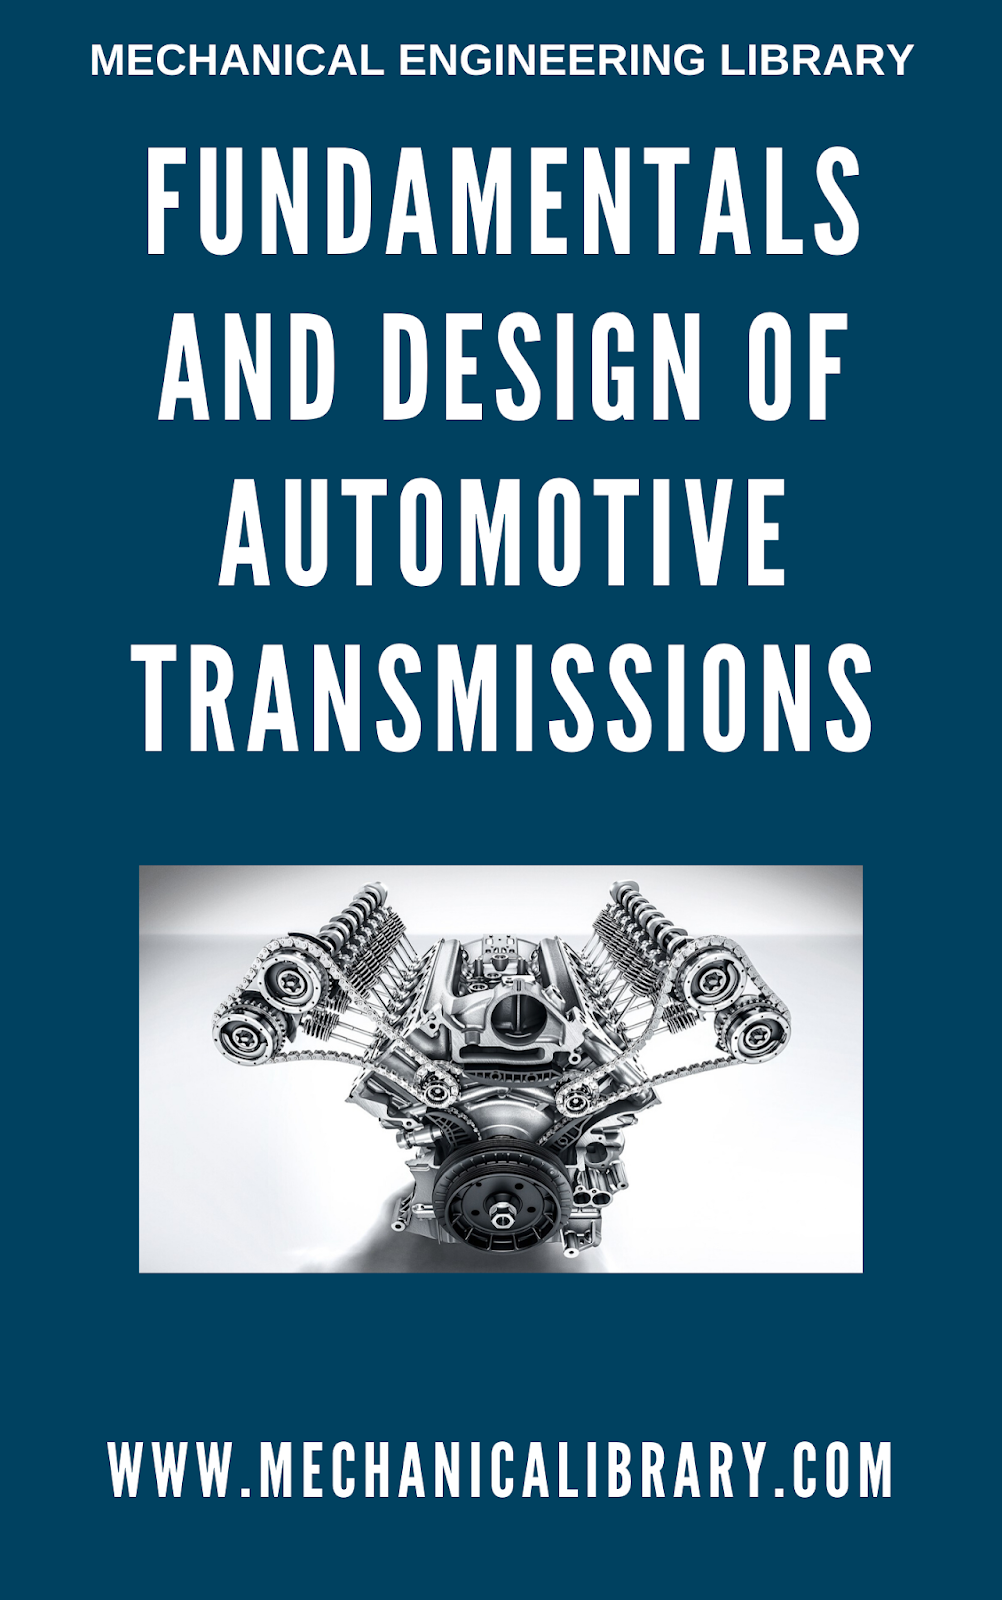 FUNDAMENTALS AND DESIGN OF AUTOMOTIVE TRANSMISSIONS TEXTBOOK